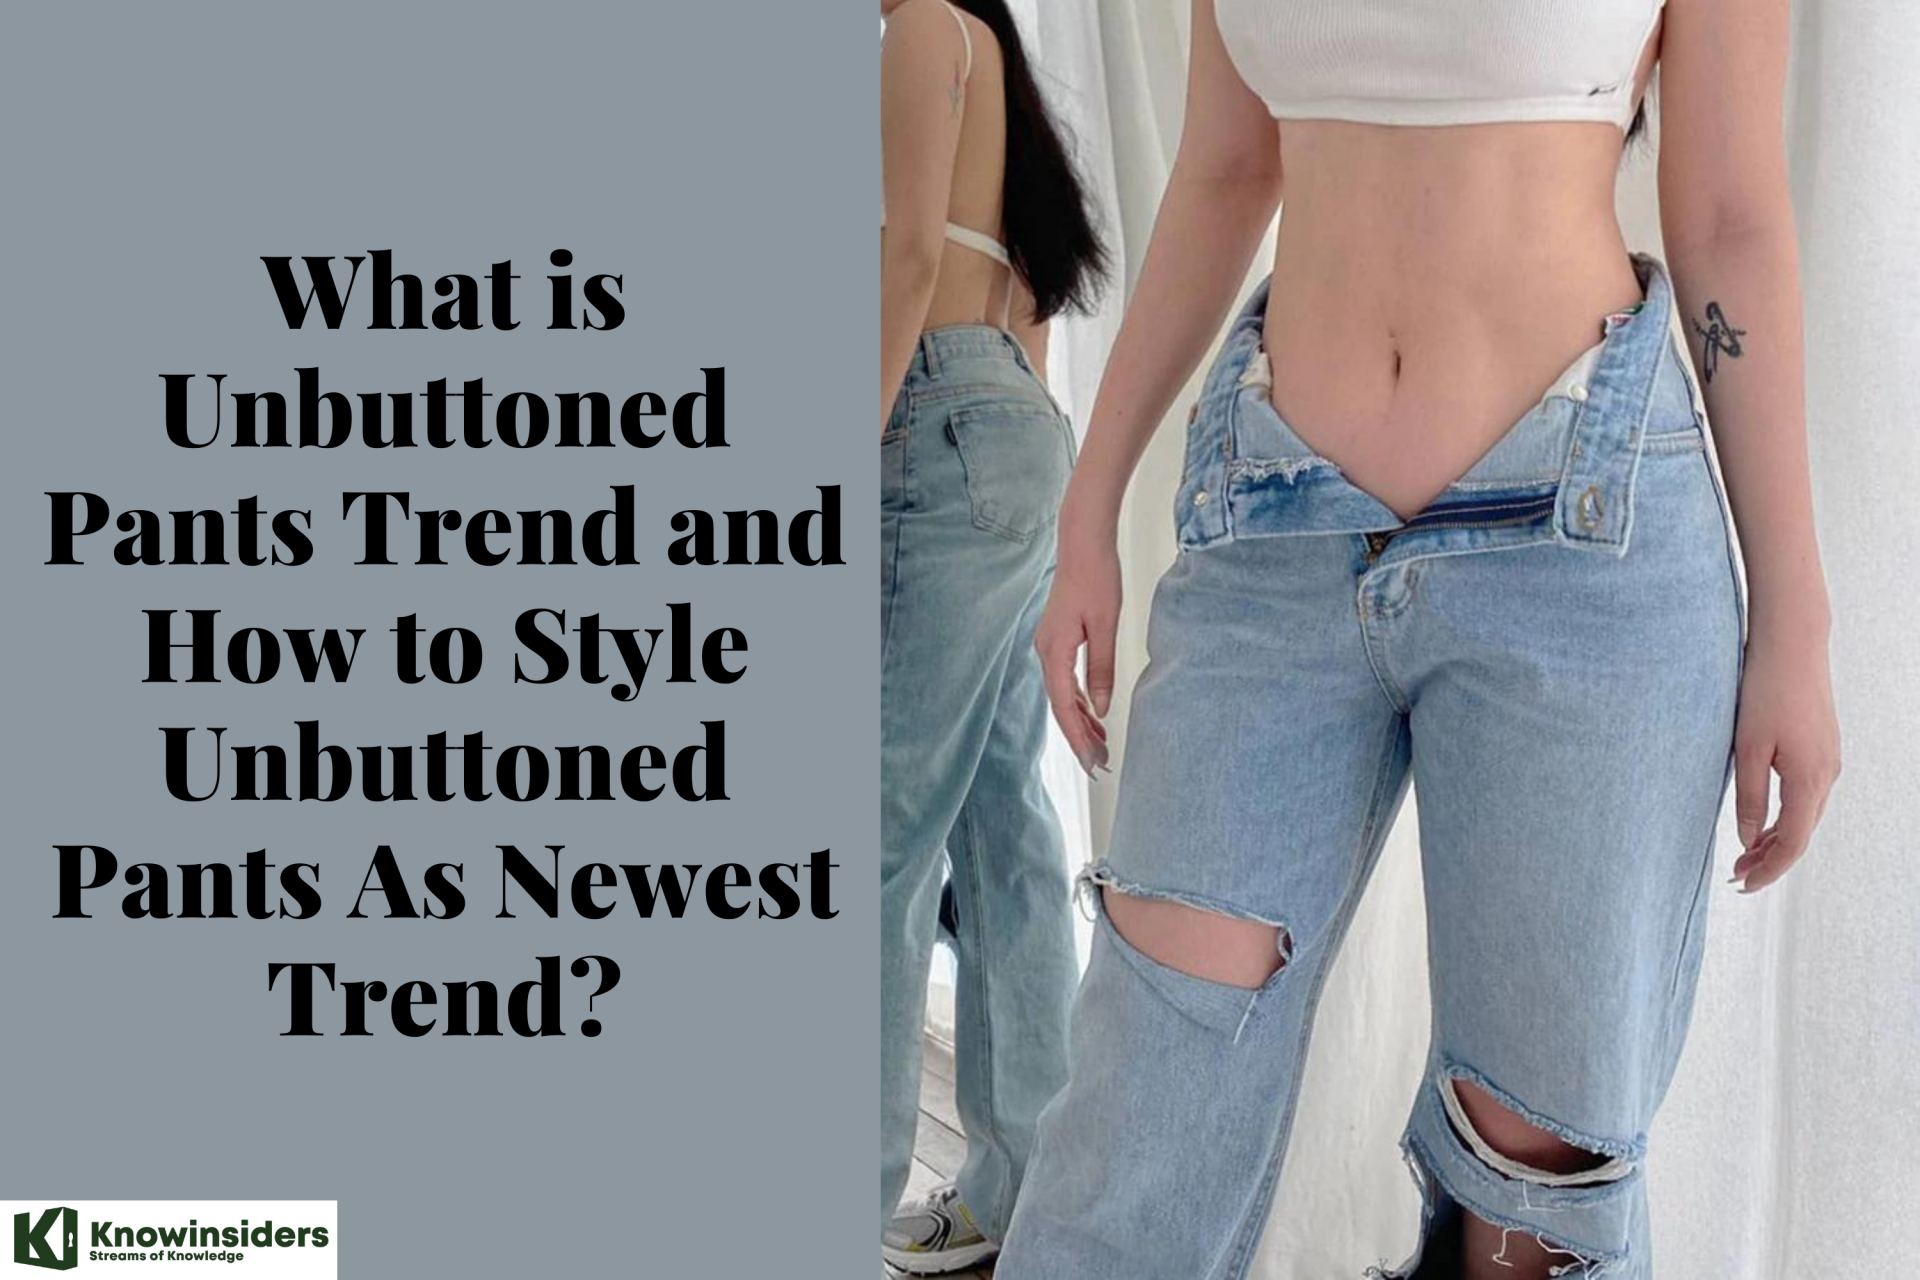 How to Style Unbuttoned Pants As Newest Trend?